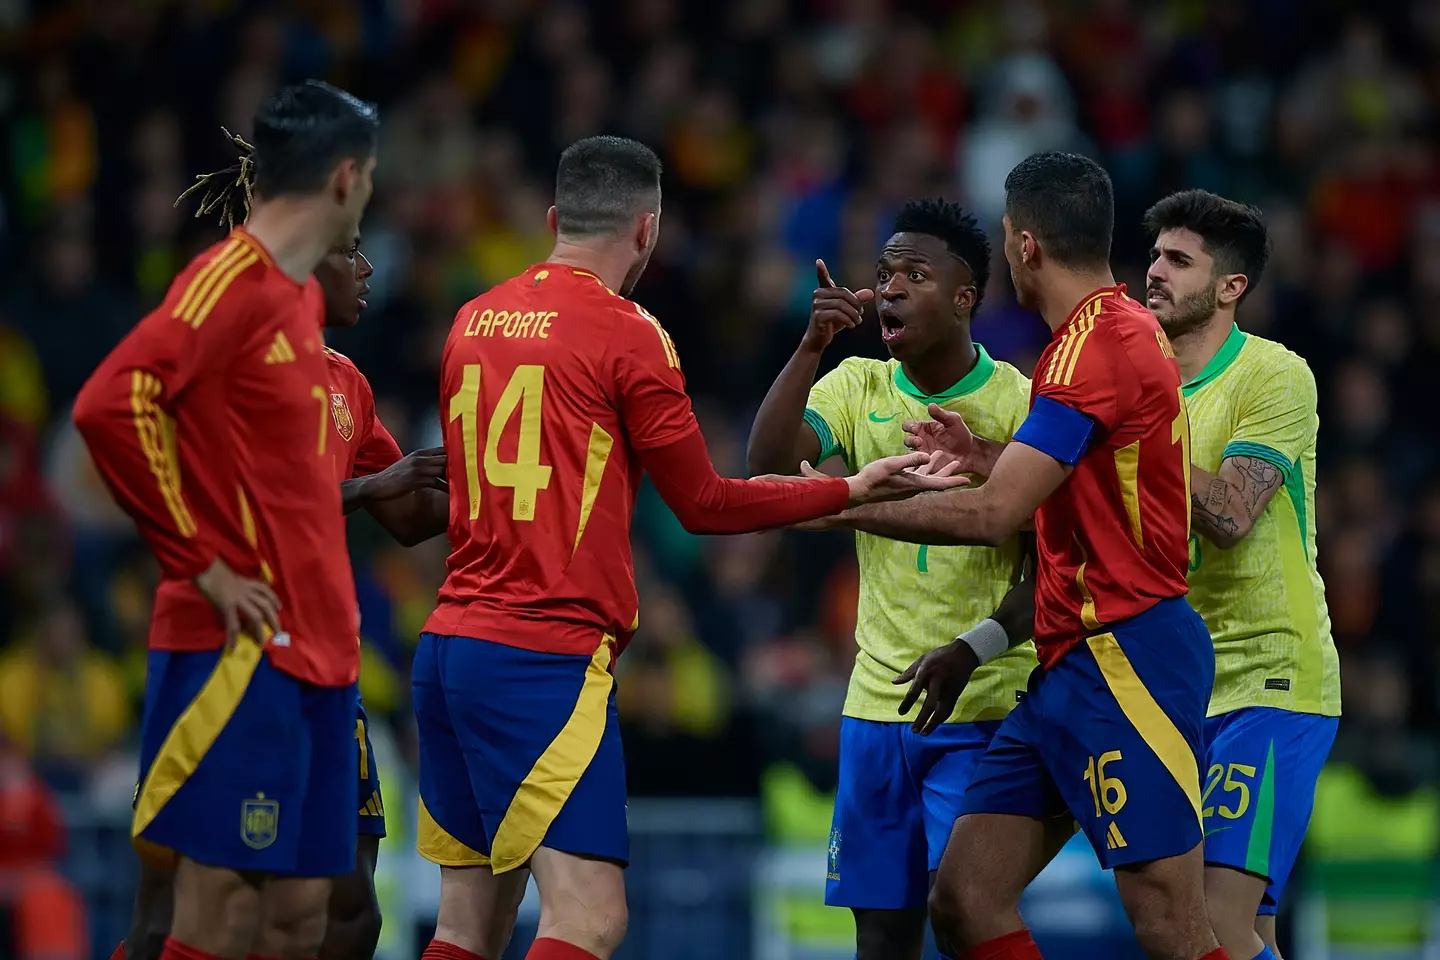 Vinicius Jr had a bust-up with Aymeric Laporte (